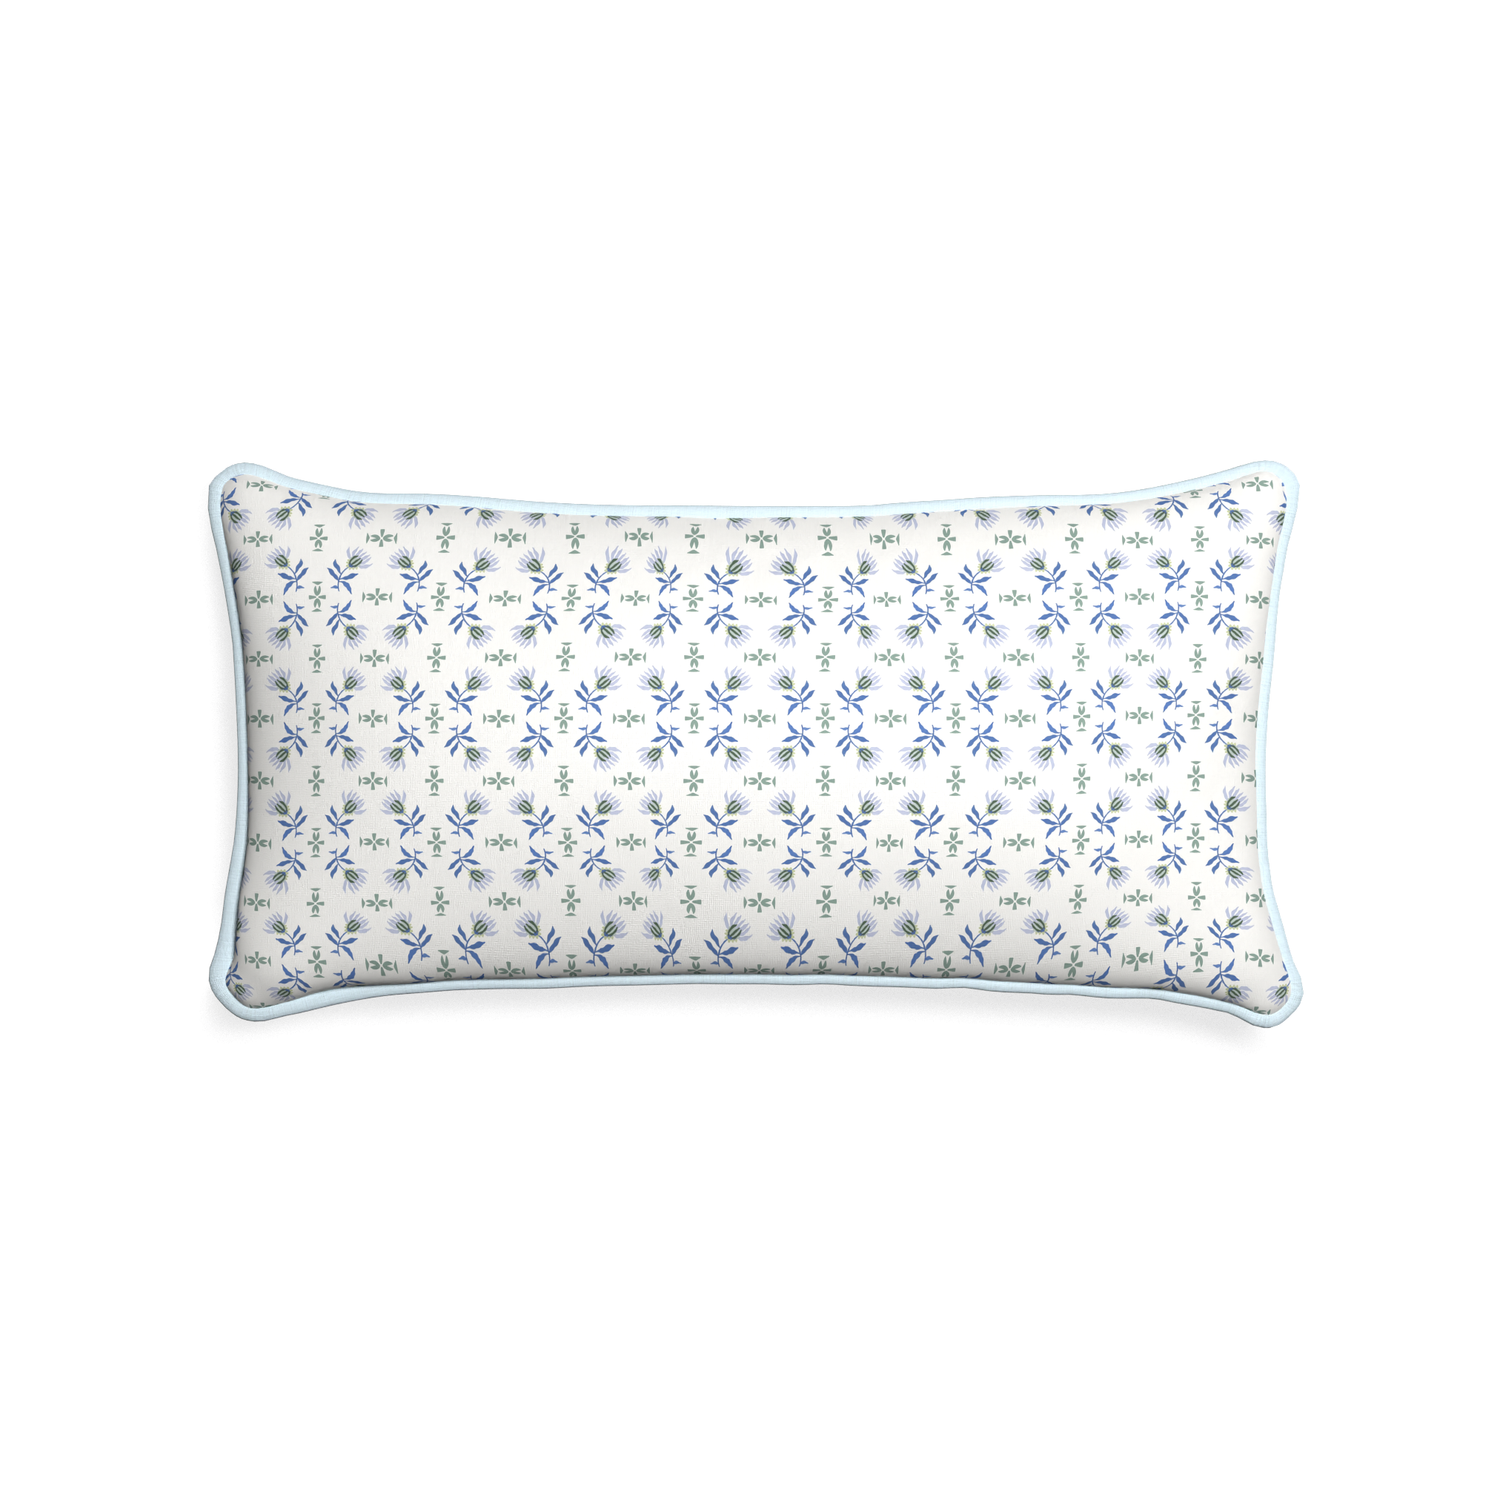 Midi-lumbar lee custom blue & green floralpillow with powder piping on white background